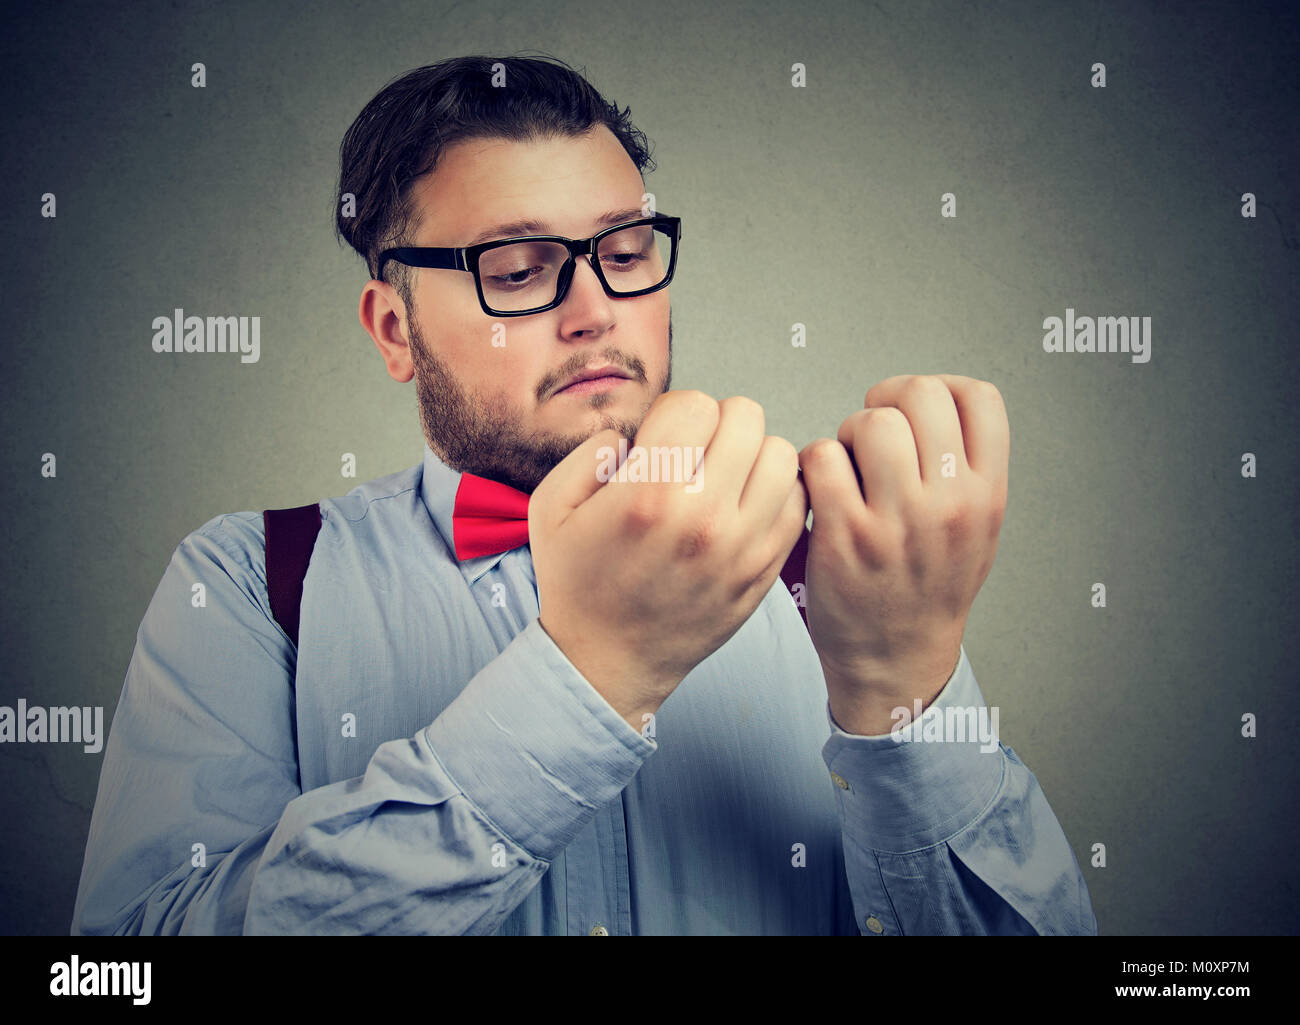 Young serious man with obsessive compulsive disorder exploring cleanliness of hands. Stock Photo